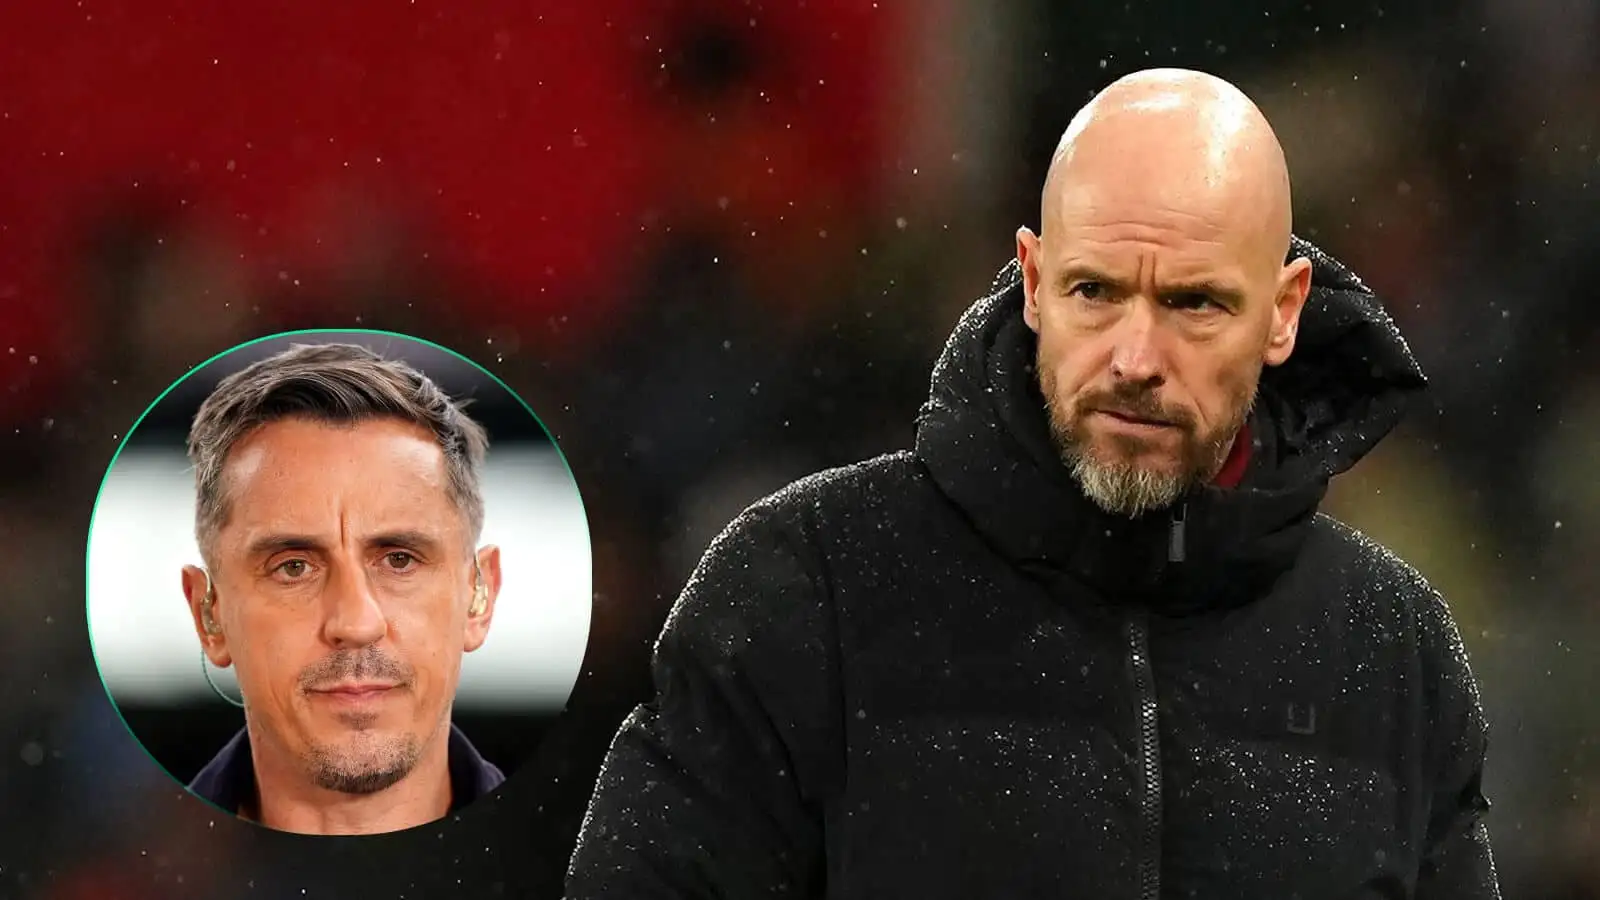 Sky Sports pundit Gary Neville has warned that sacking Erik ten Hag will achieve nothing at Manchester United